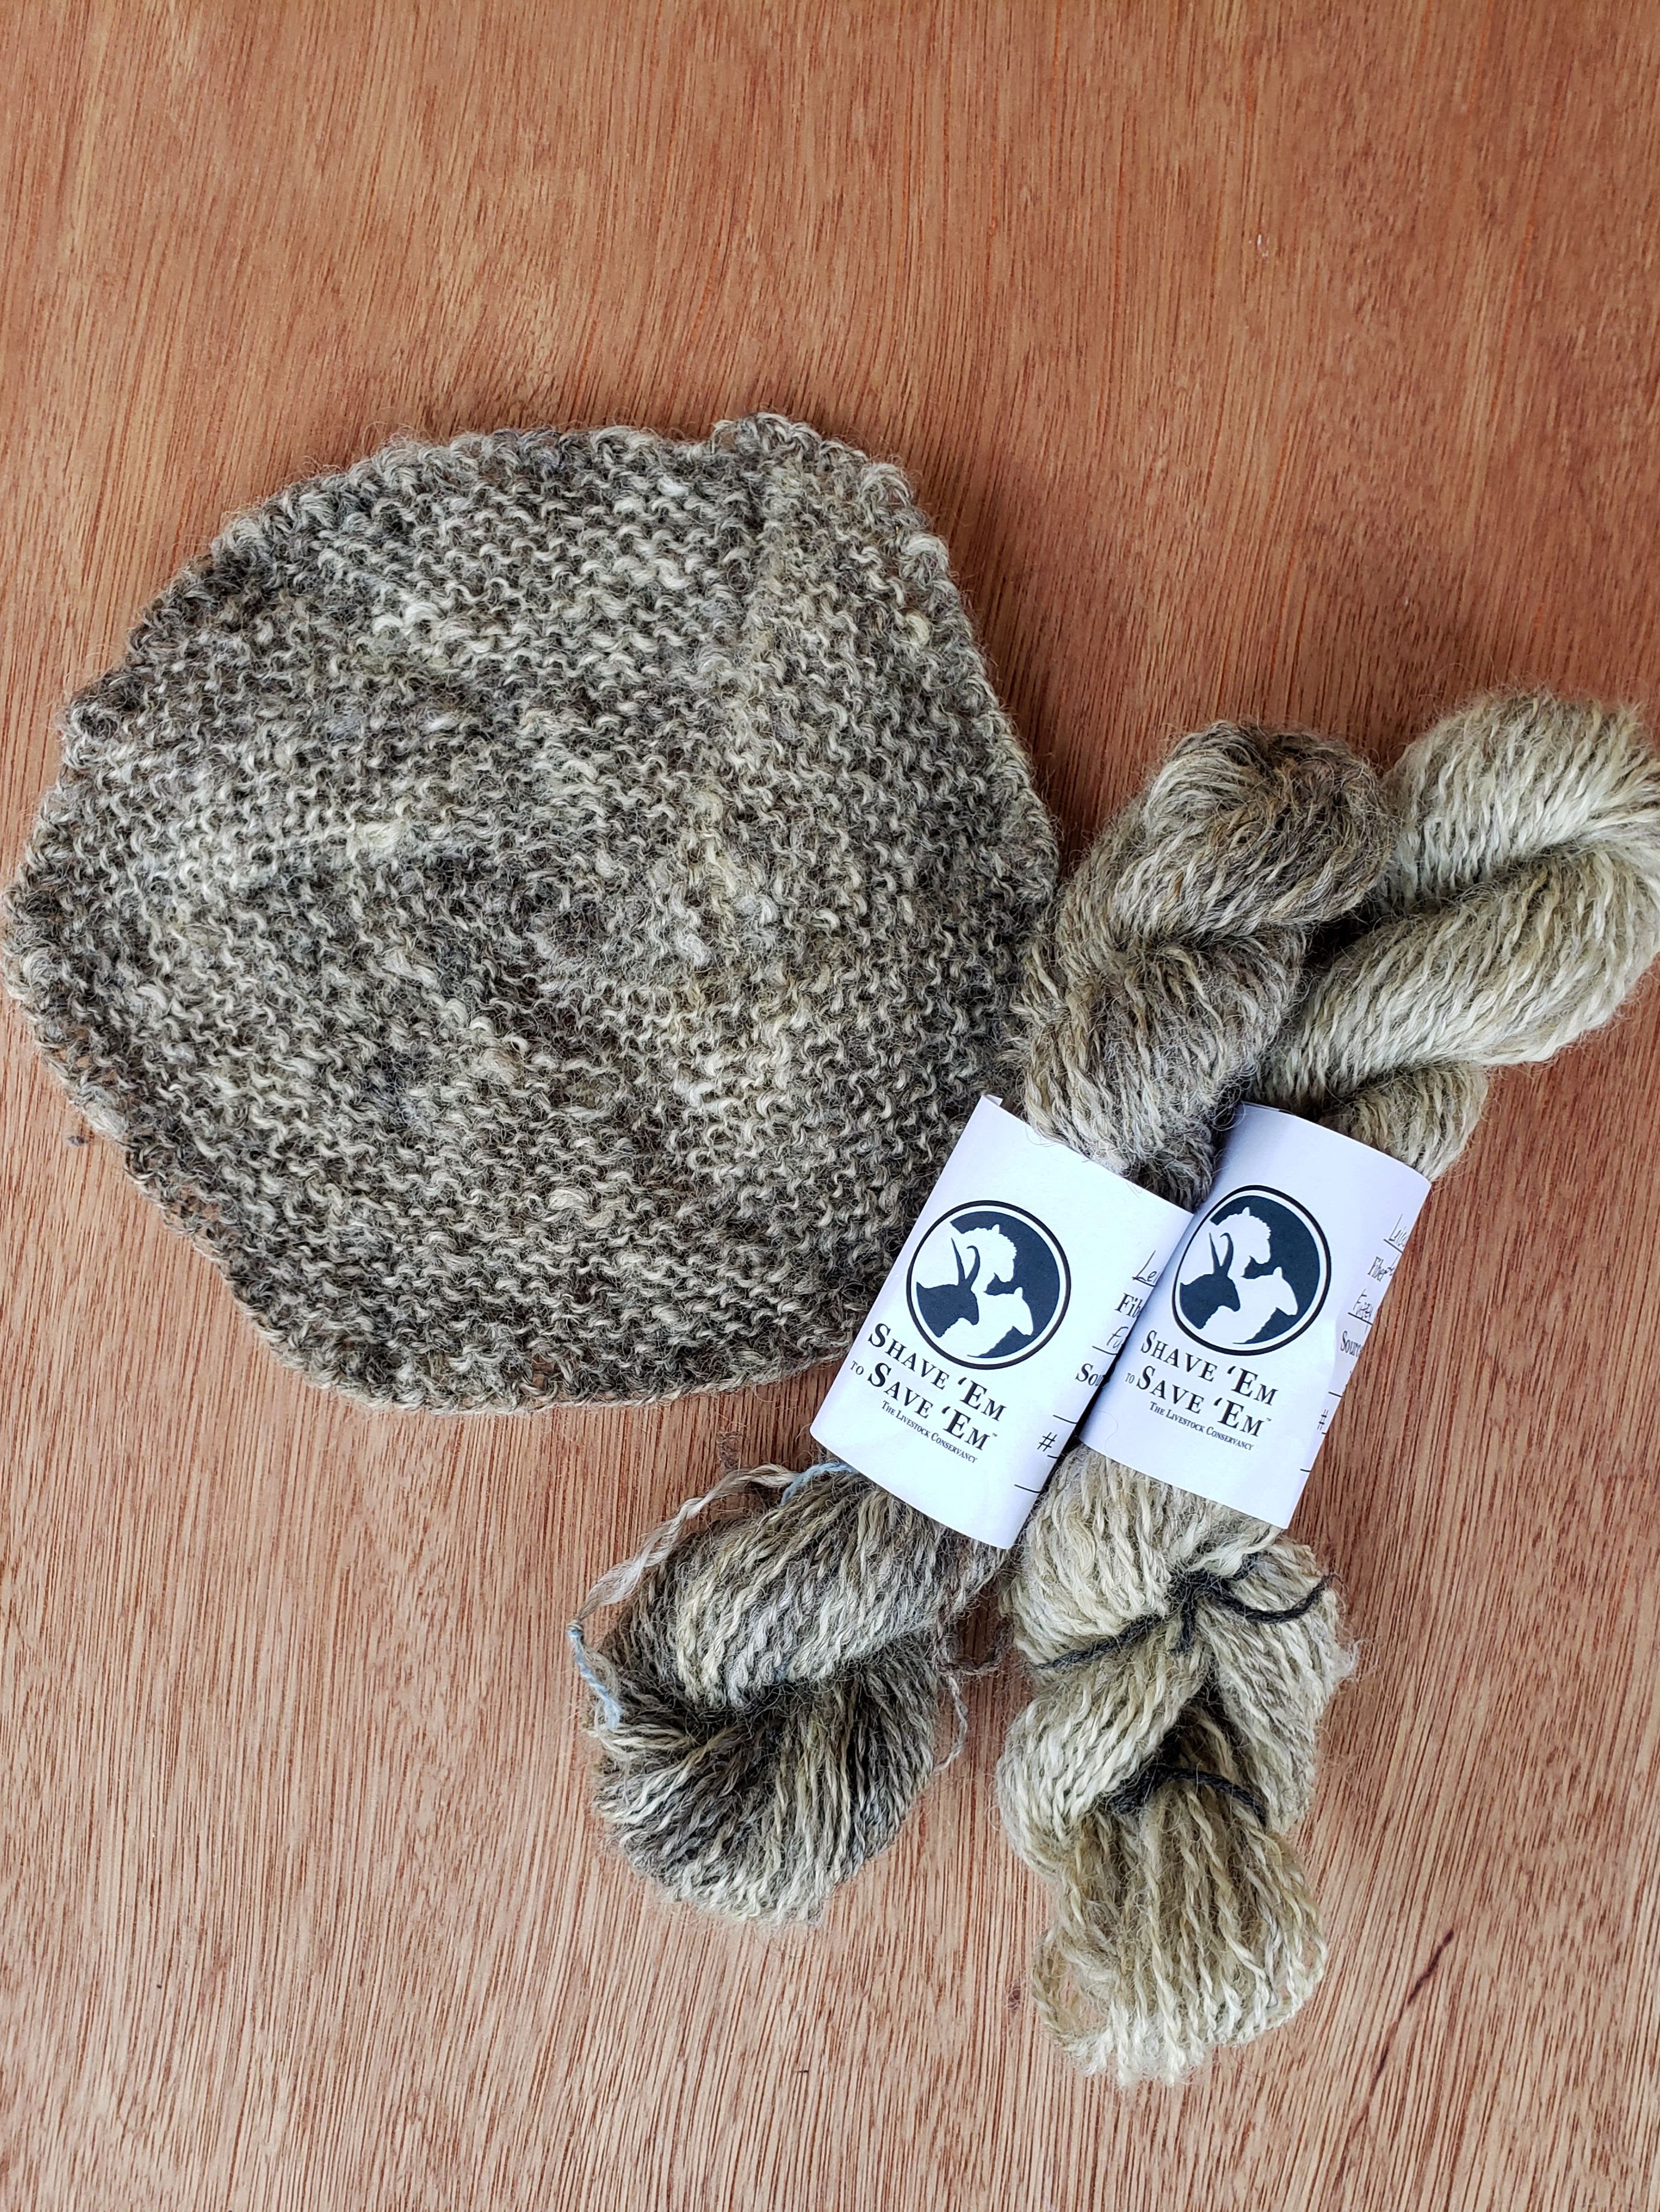 (L-R) An knitted hexagon from carded longwool; two skeins of Leicester Longwool yarn.